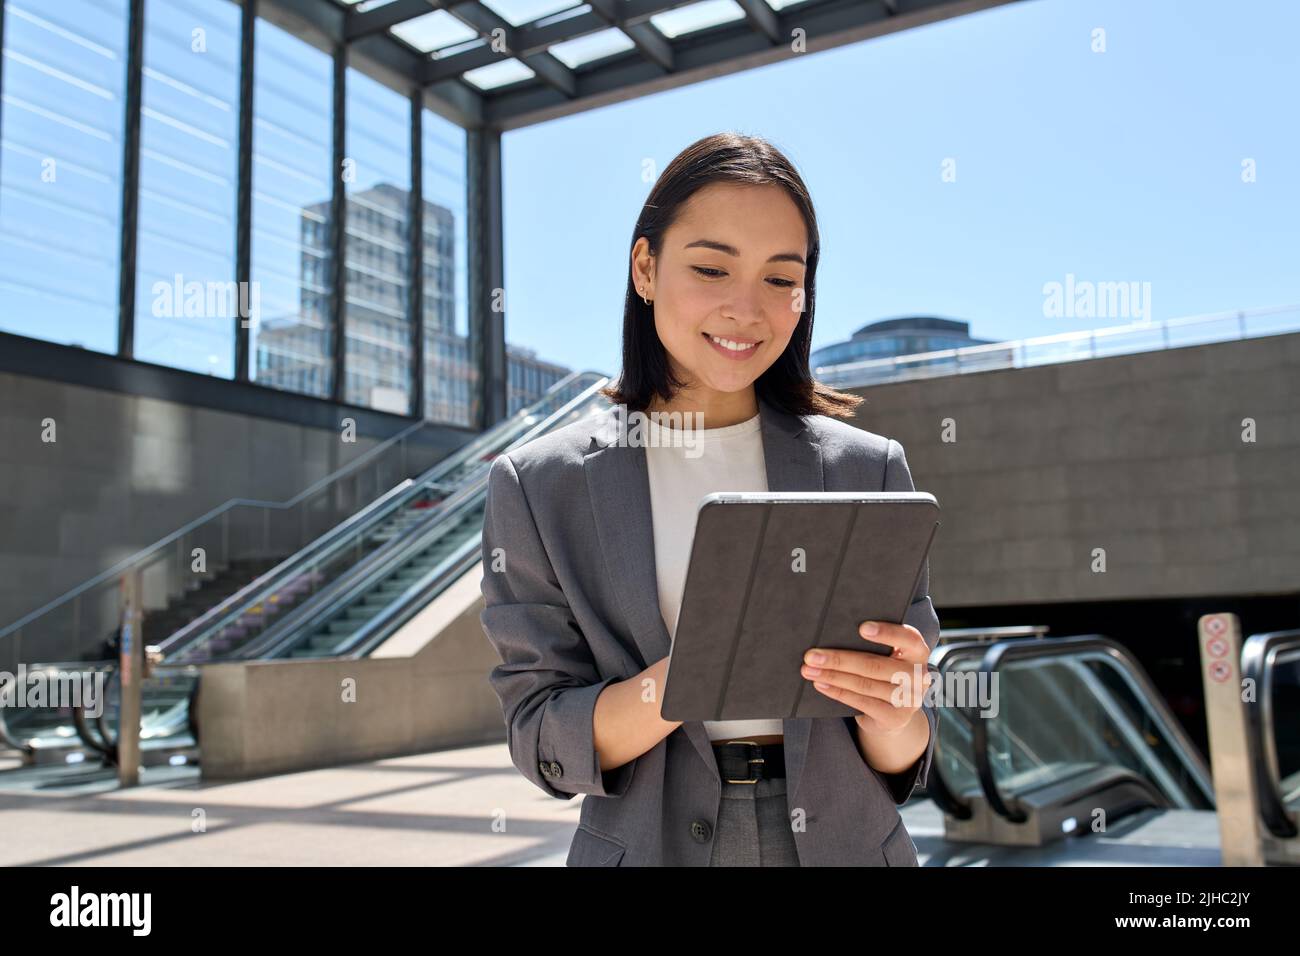 Smiling Asian young business woman standing in city subway using tablet. Stock Photo